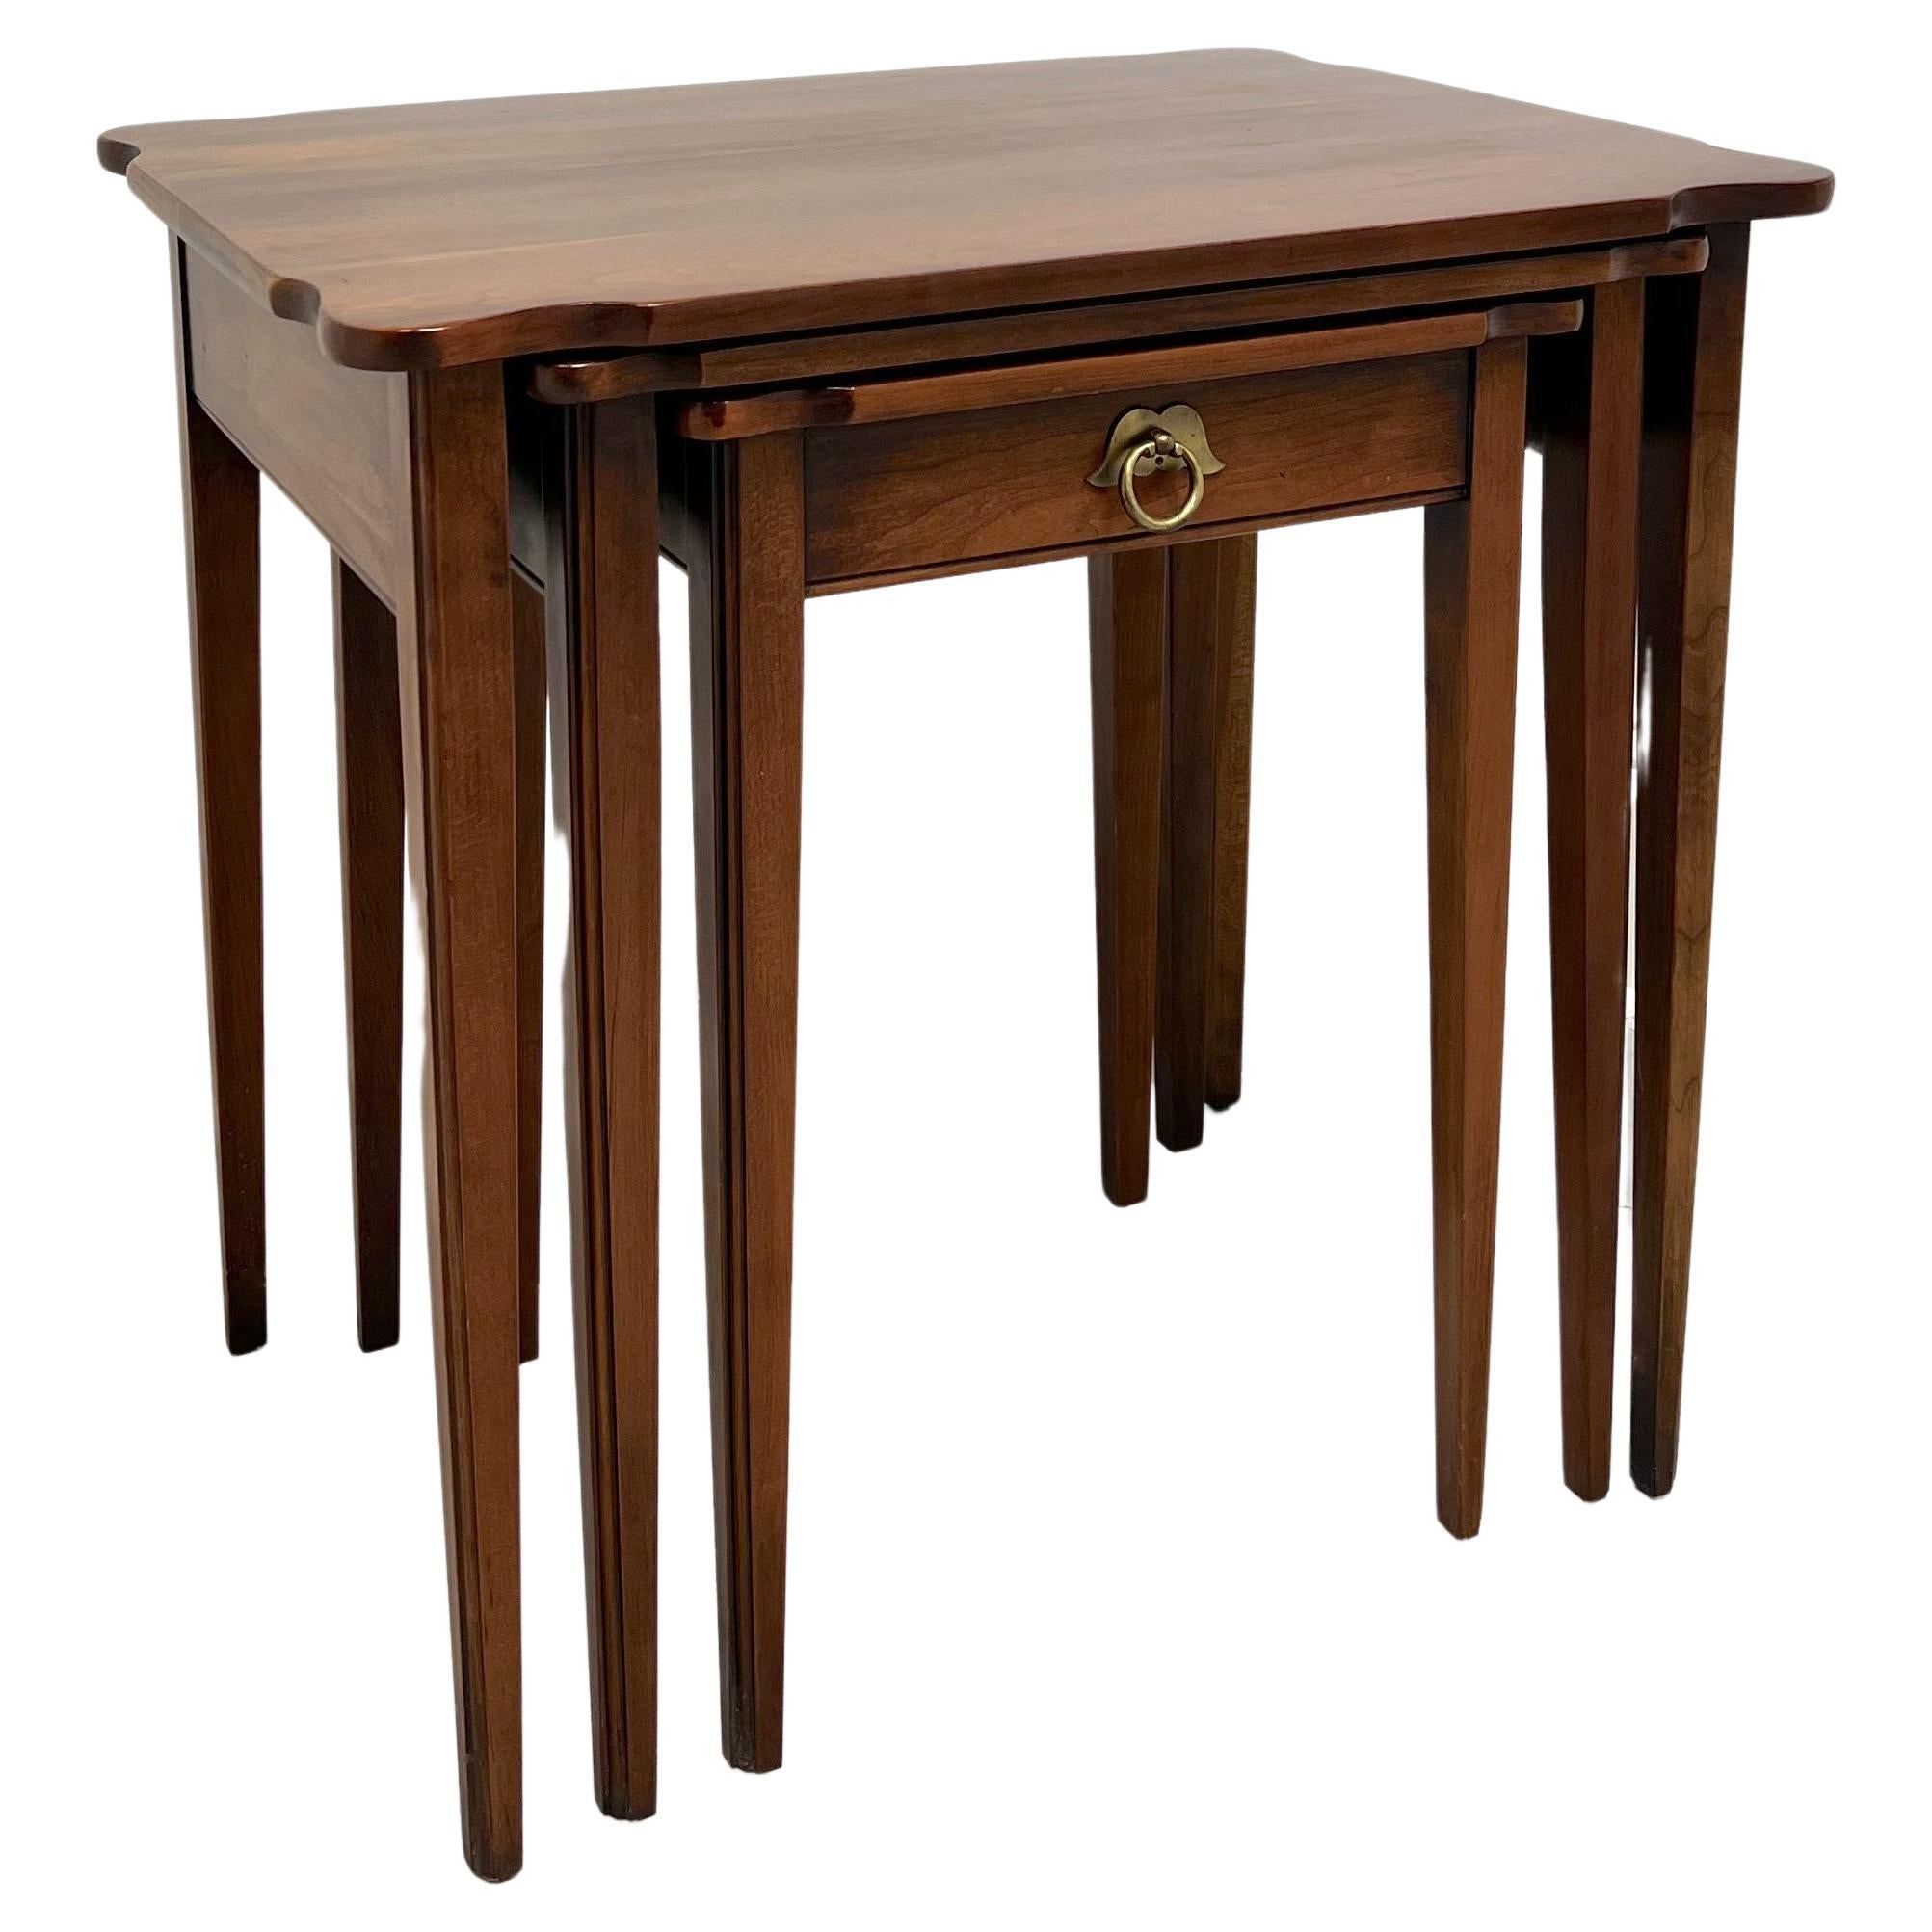 STATTON Centennial Cherry Chippendale Nesting Tables - Set of 3 For Sale